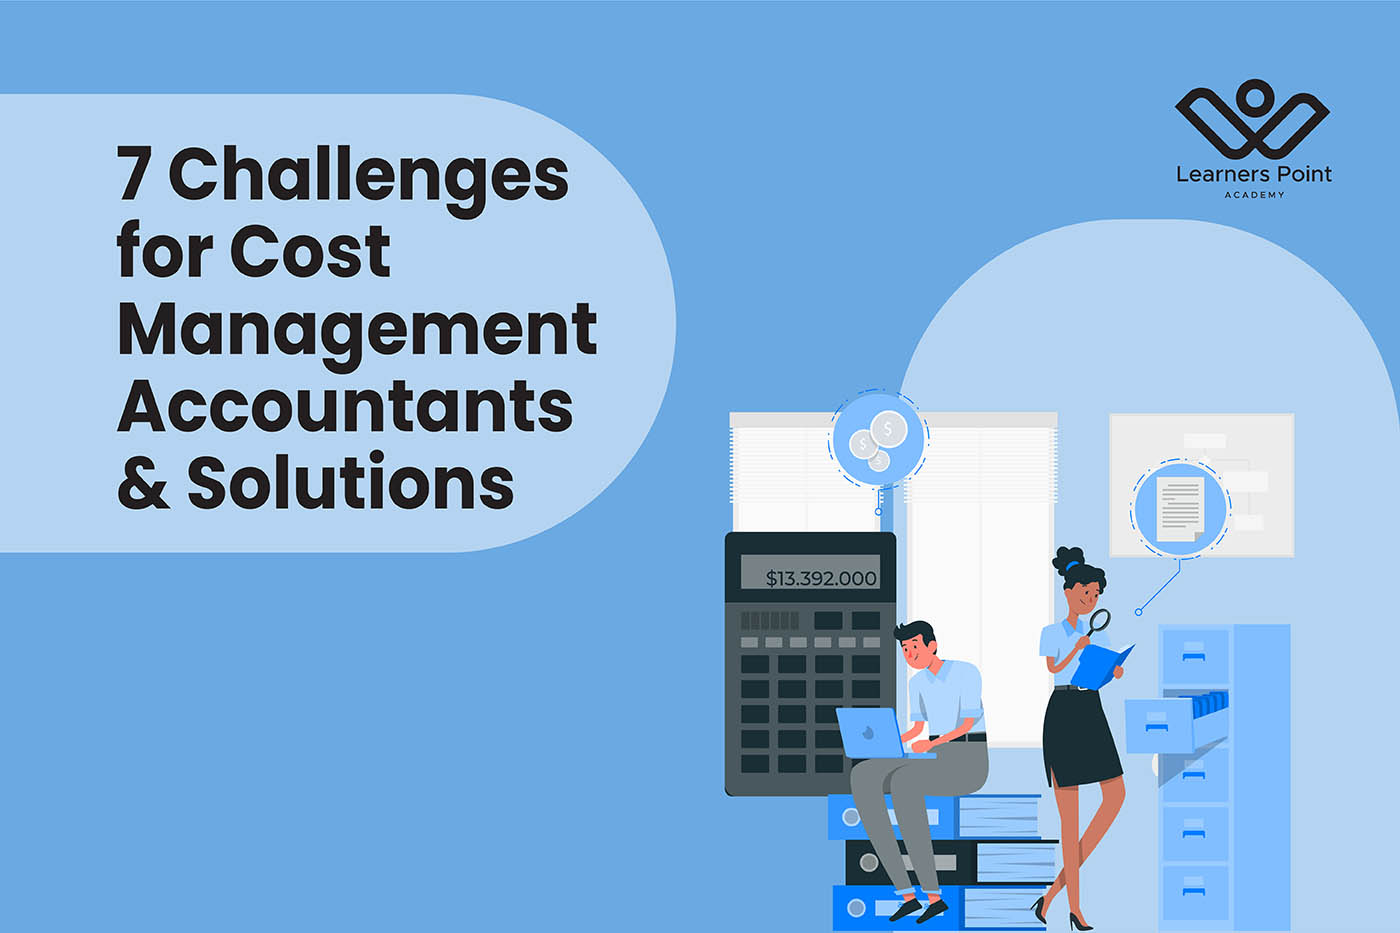 7 Challenges for Cost Management Accountants & Solutions